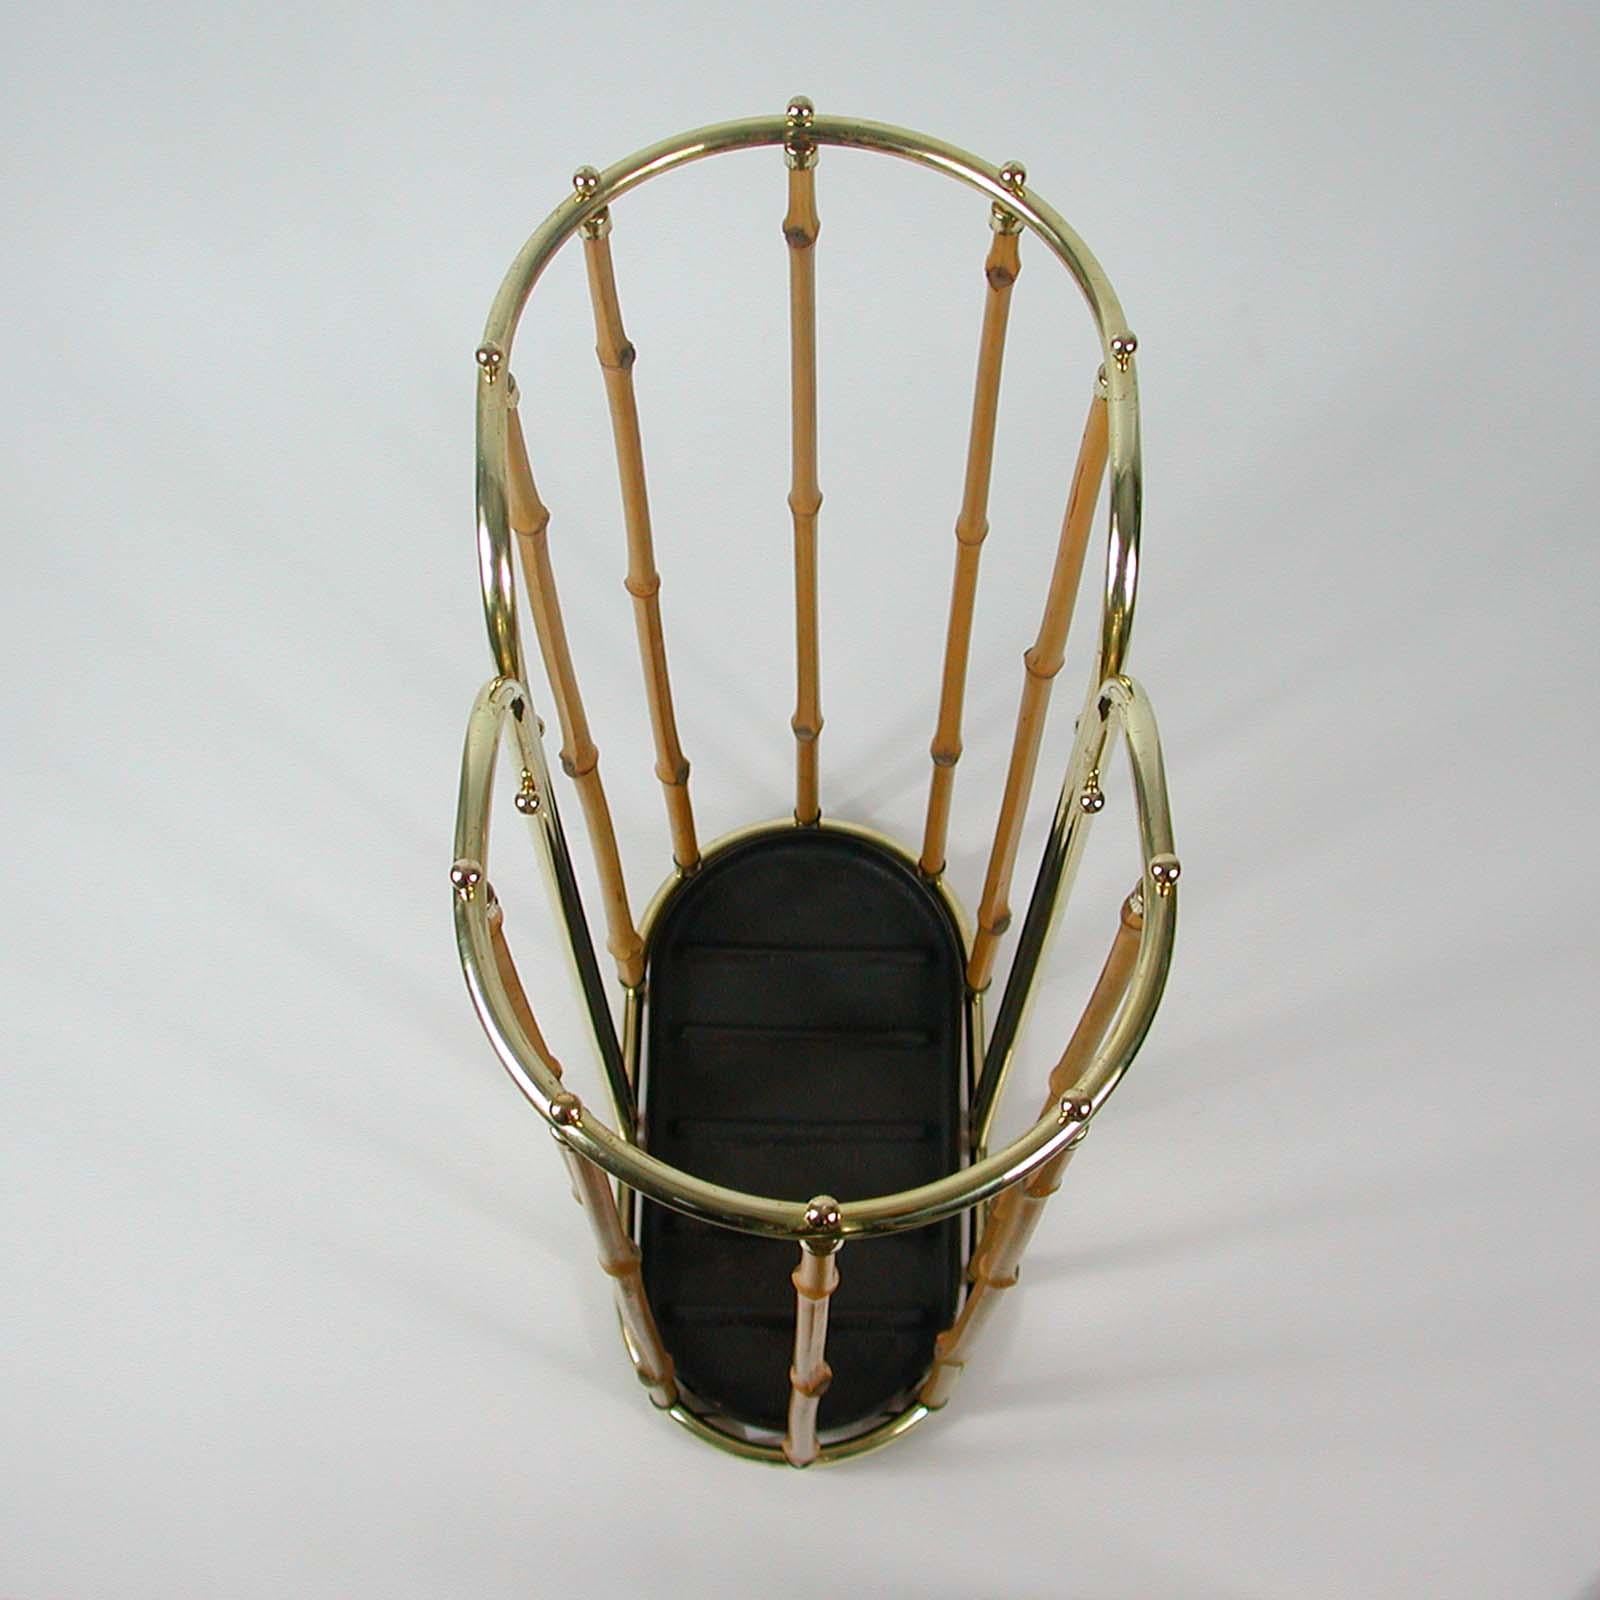 Midcentury Bamboo and Brass Umbrella Stand, Austria, 1950s For Sale 9